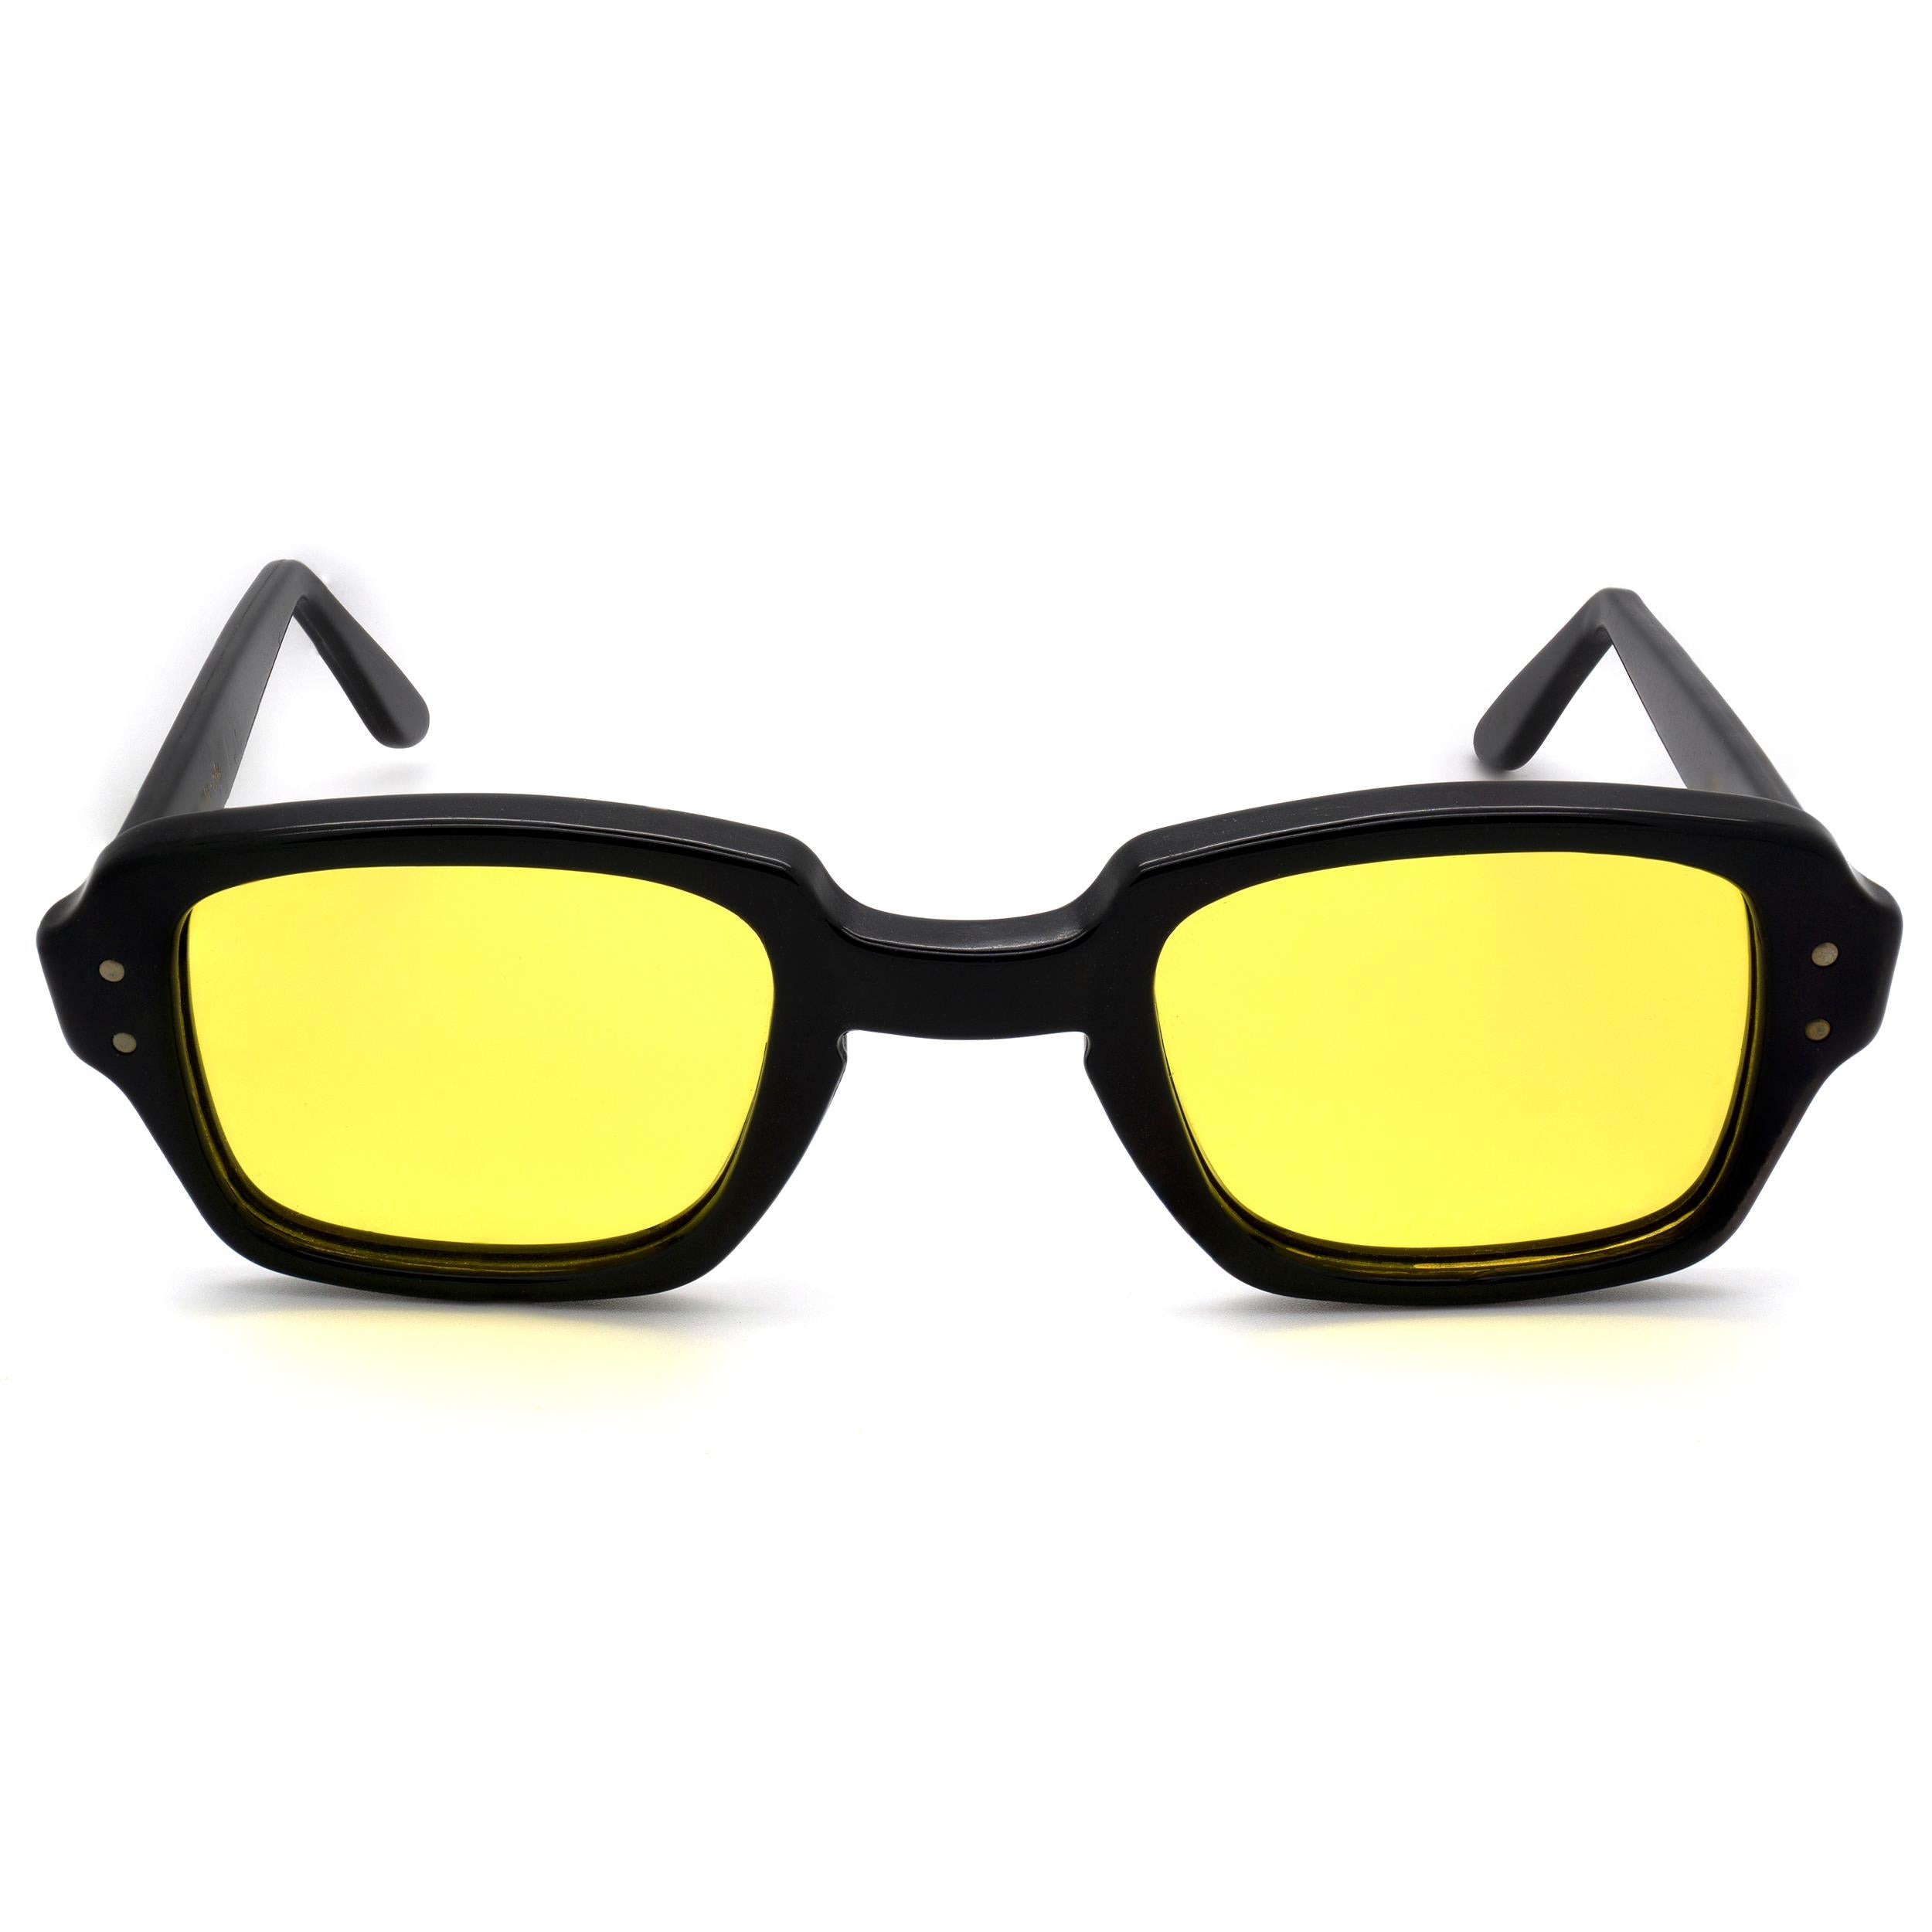 US Military vintage sunglasses, made in U.S.A. Famous BCG yellow ...